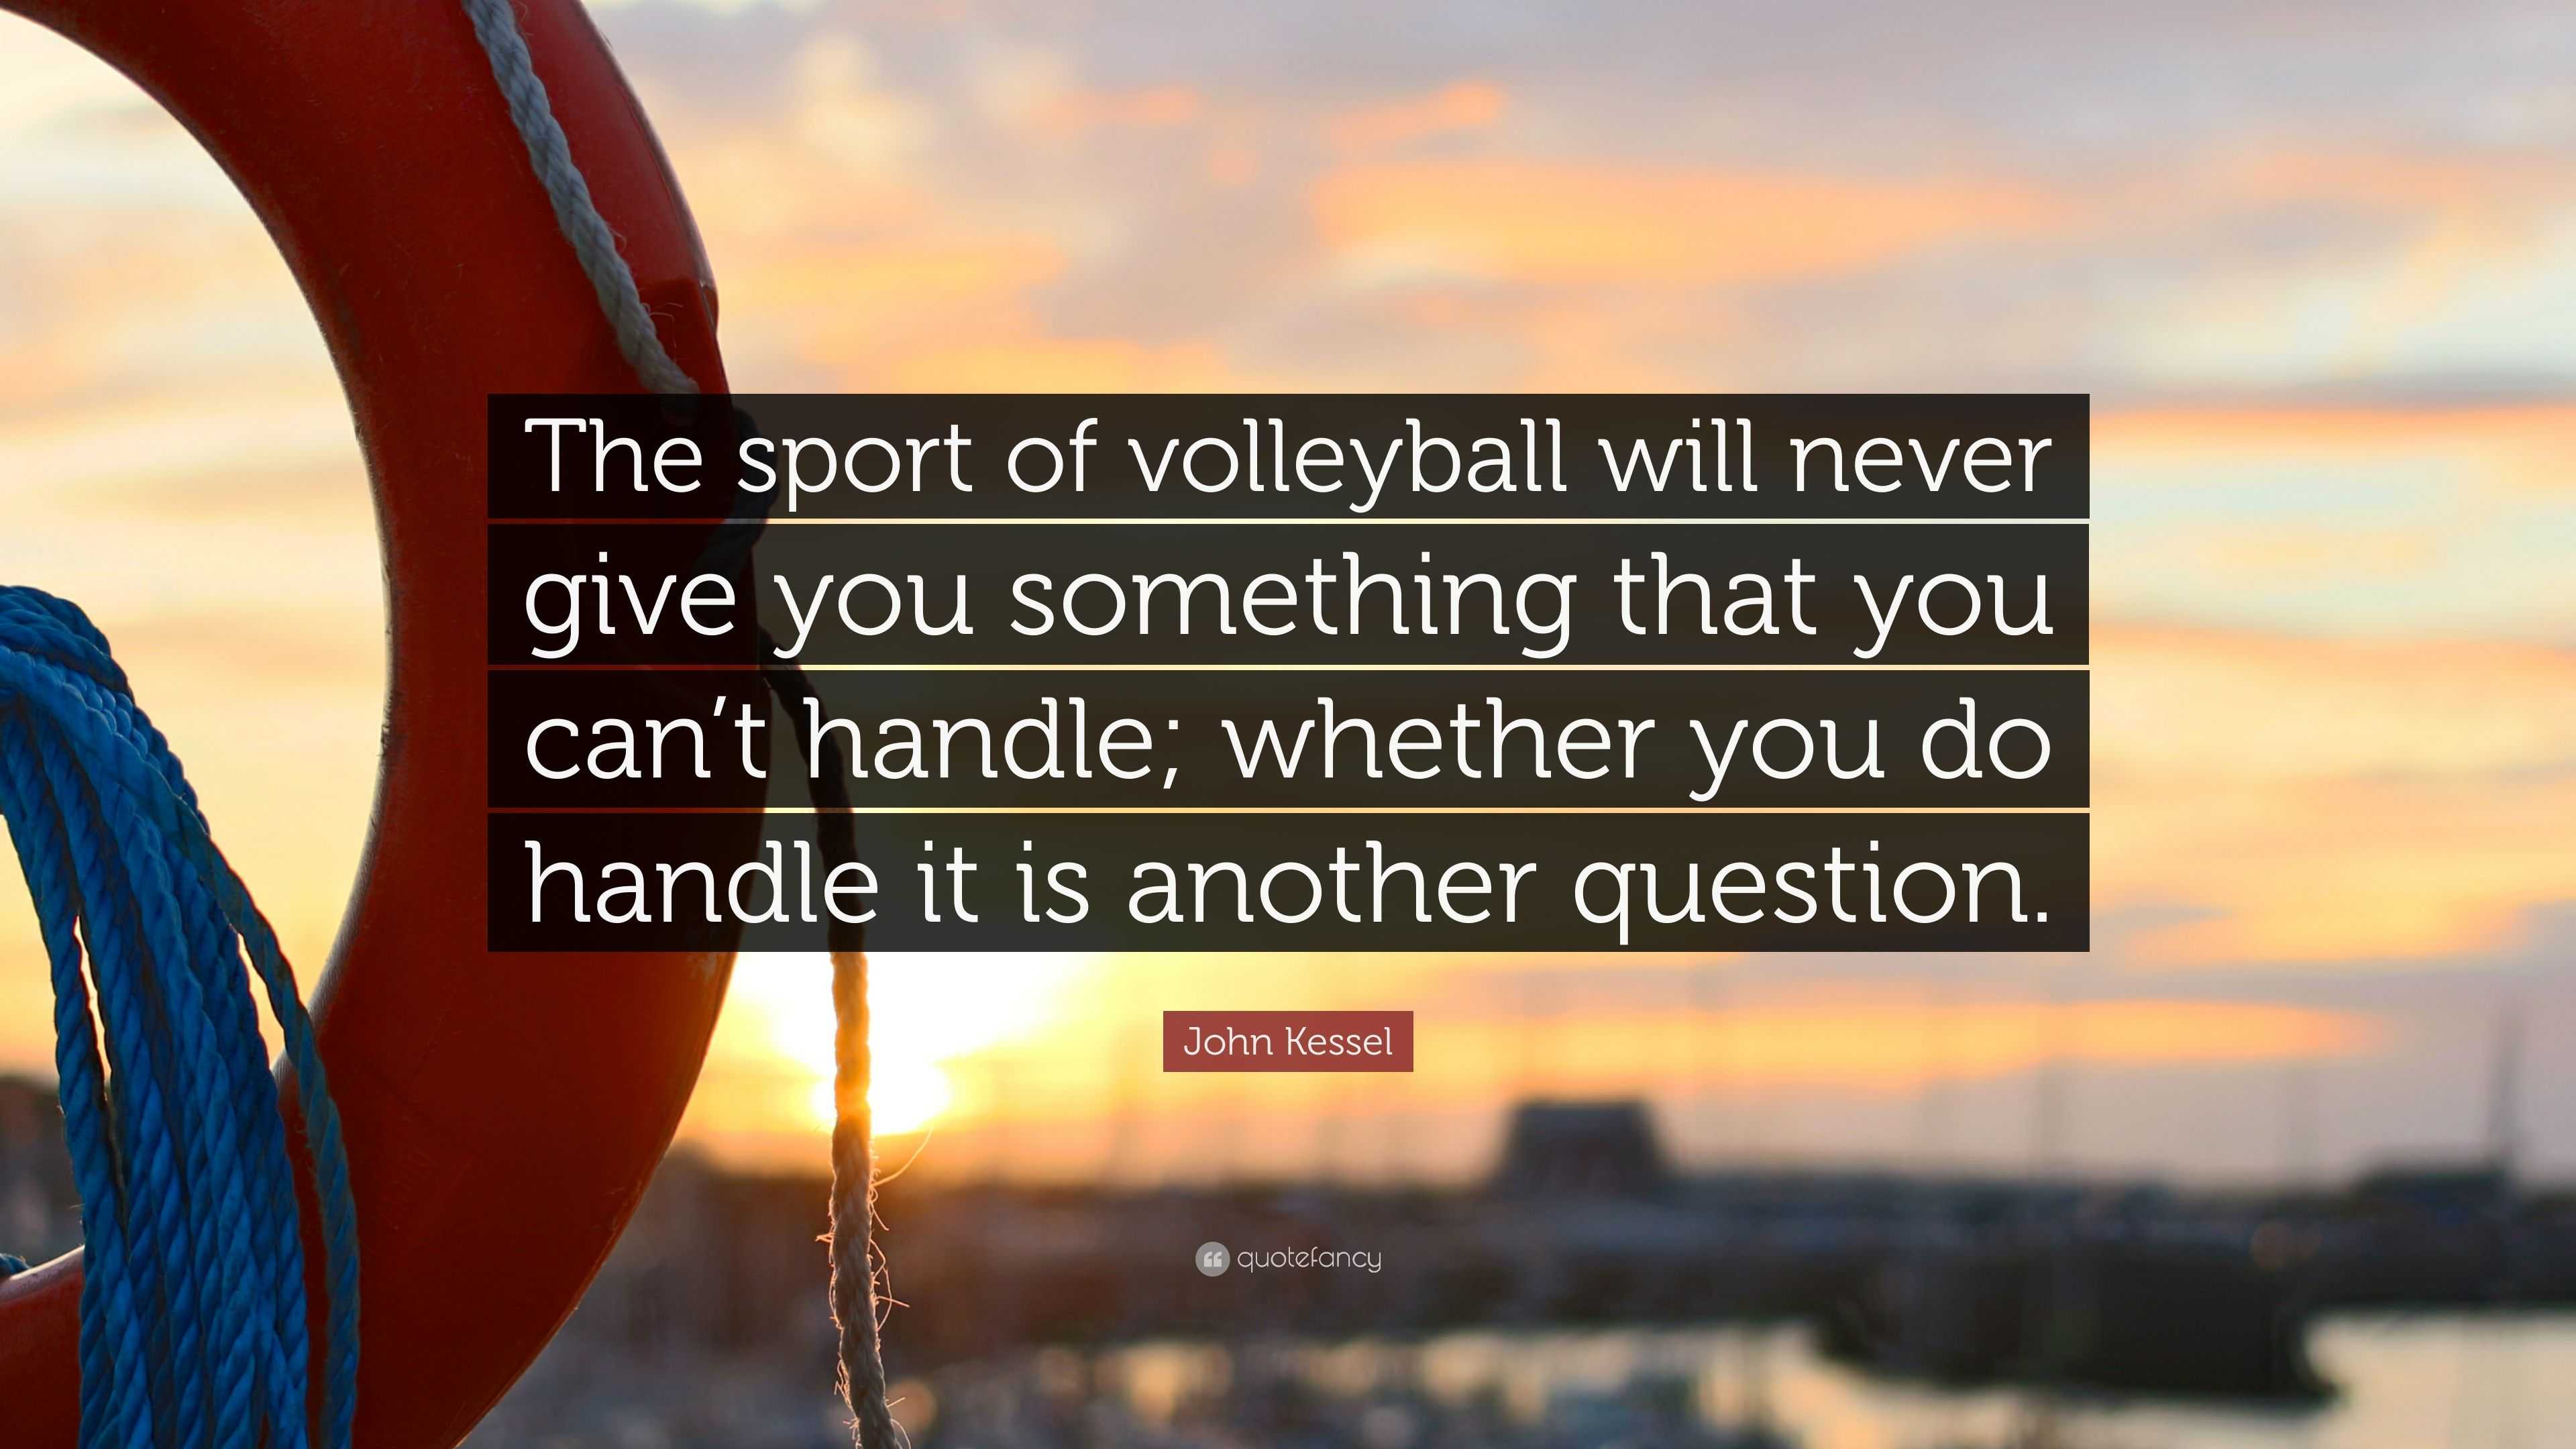 John Kessel Quote: “The sport of volleyball will never give you ...